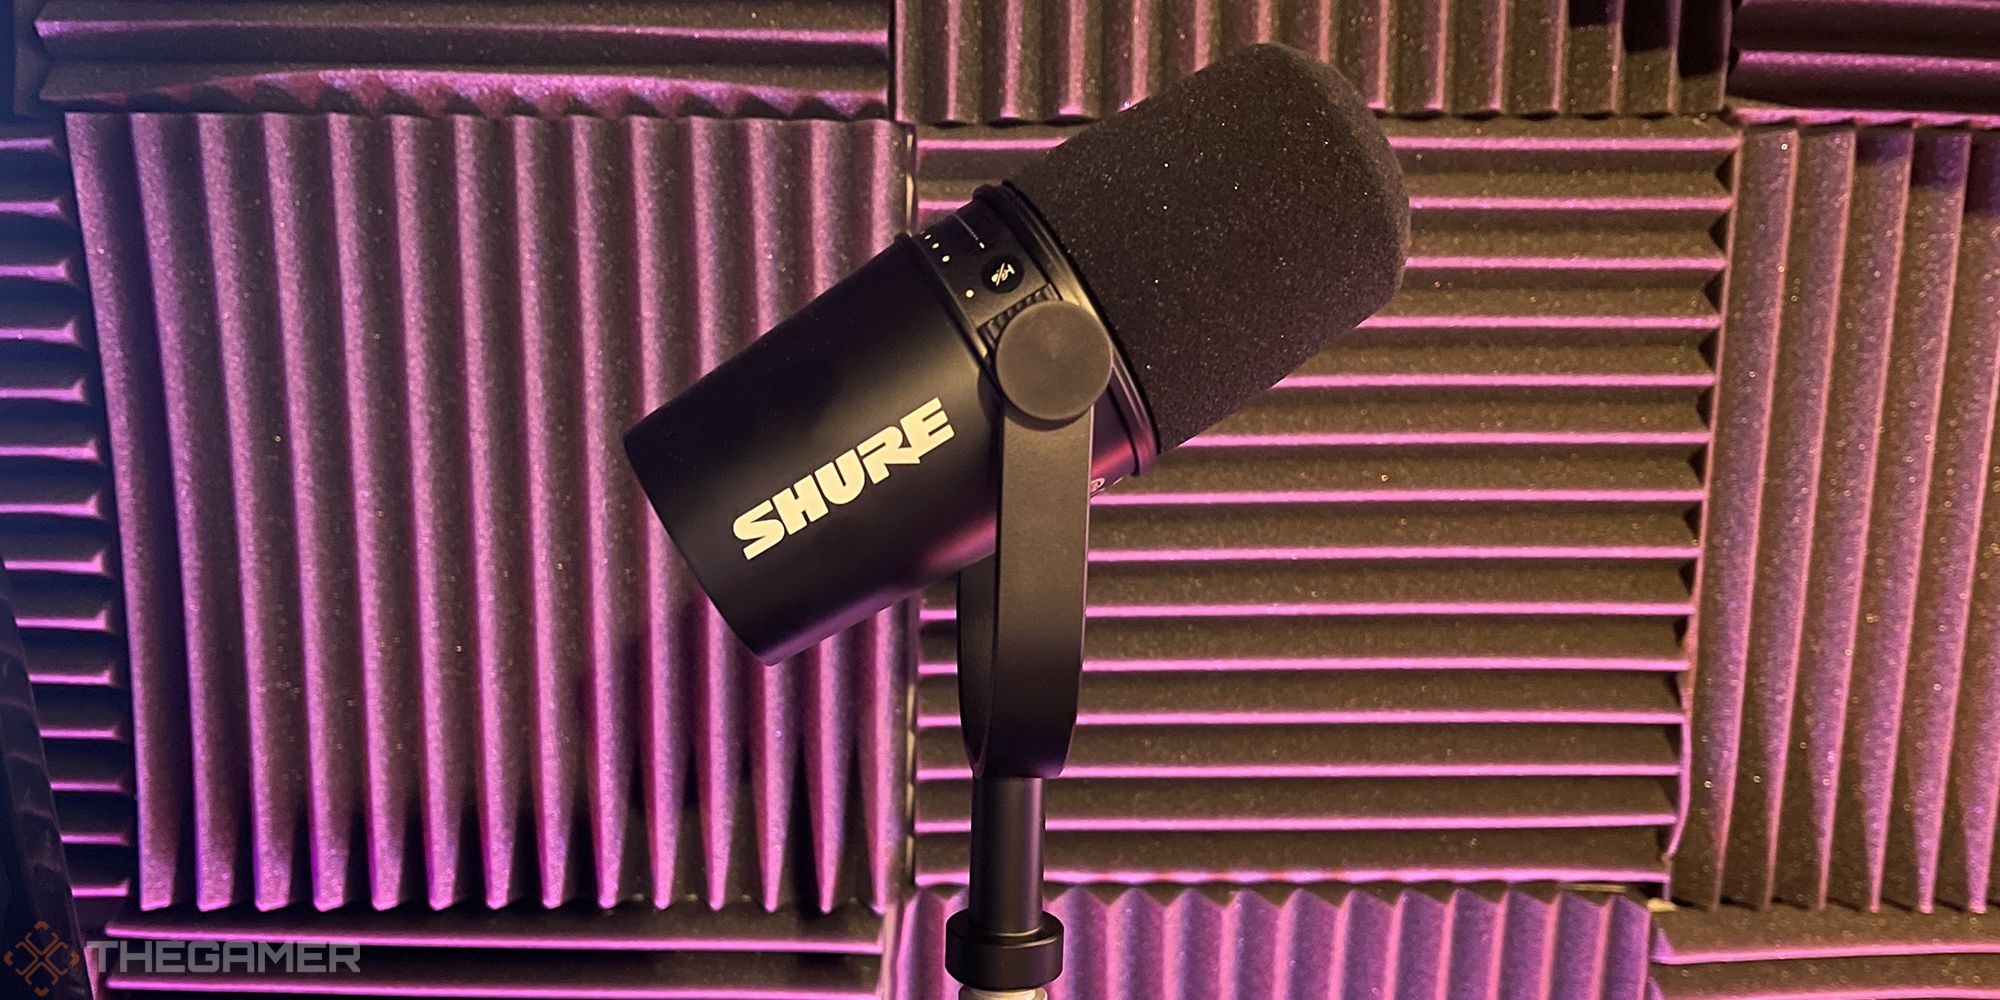 Shure MV7 Podcast Microphone Kit with Tabletop Tripod and